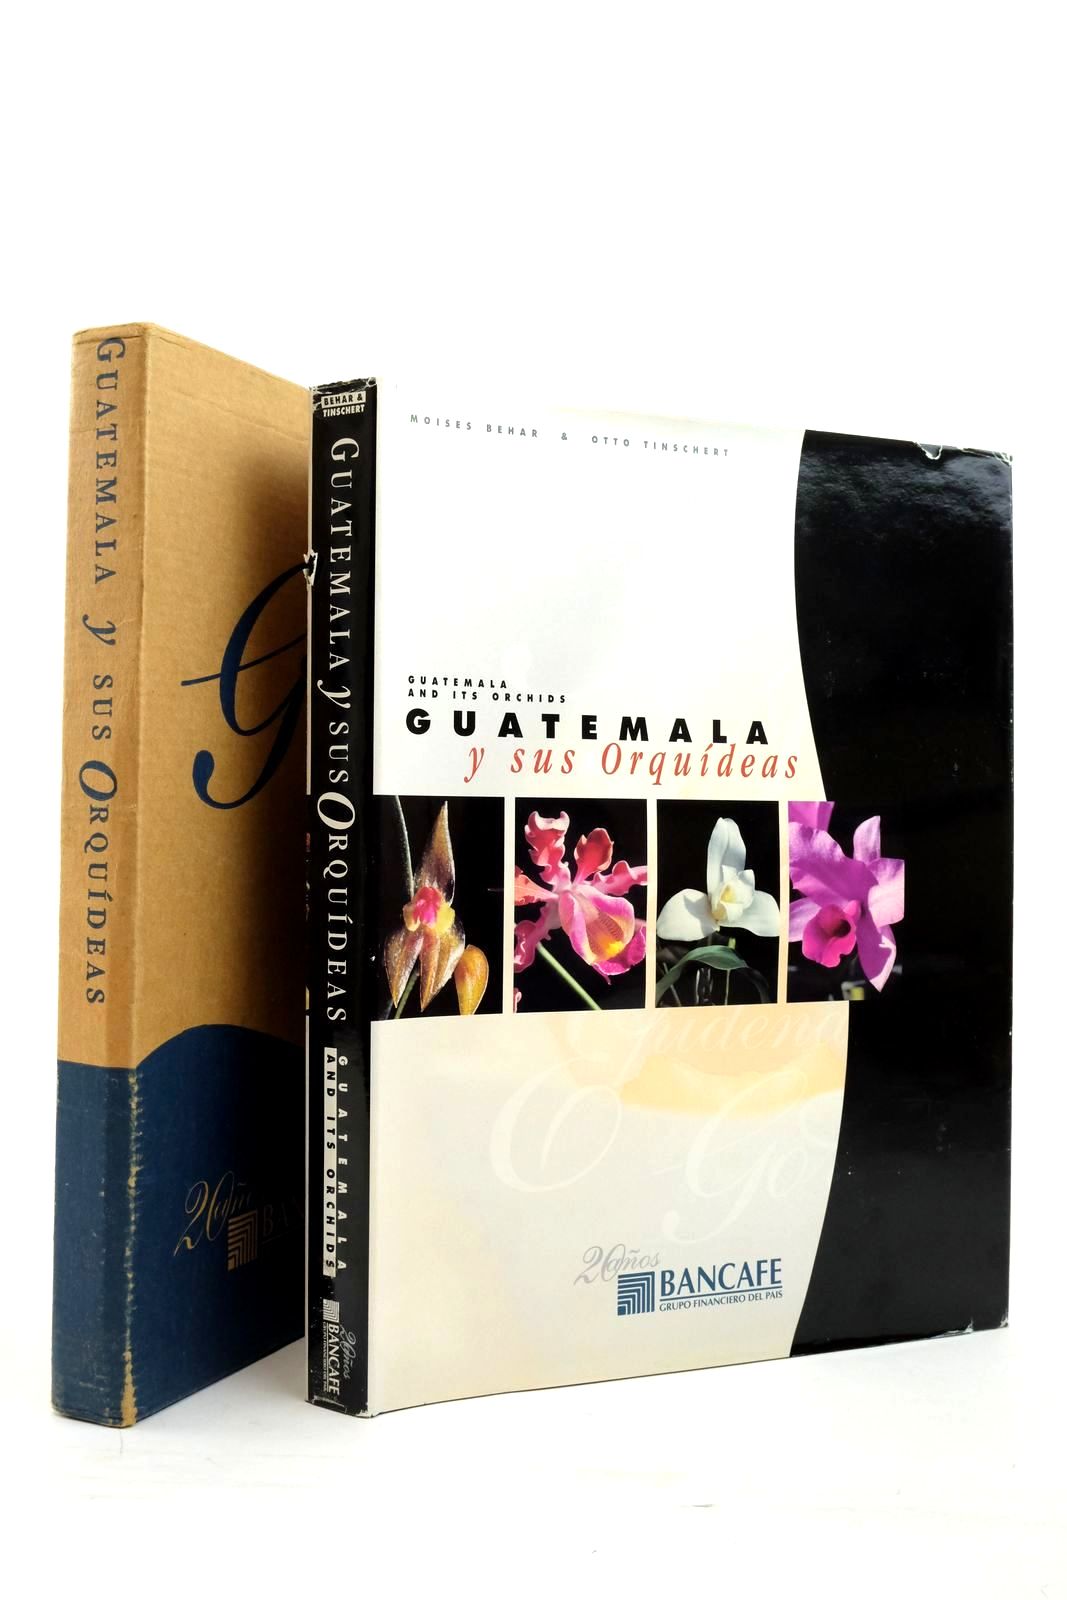 Photo of GUATEMALA Y SUS ORQUIDEAS / GUATEMALA AND ITS ORCHIDS written by Behar, Moises Tinschert, Otto published by Bancafe Grupo Financiero Del Pais (STOCK CODE: 2136579)  for sale by Stella & Rose's Books